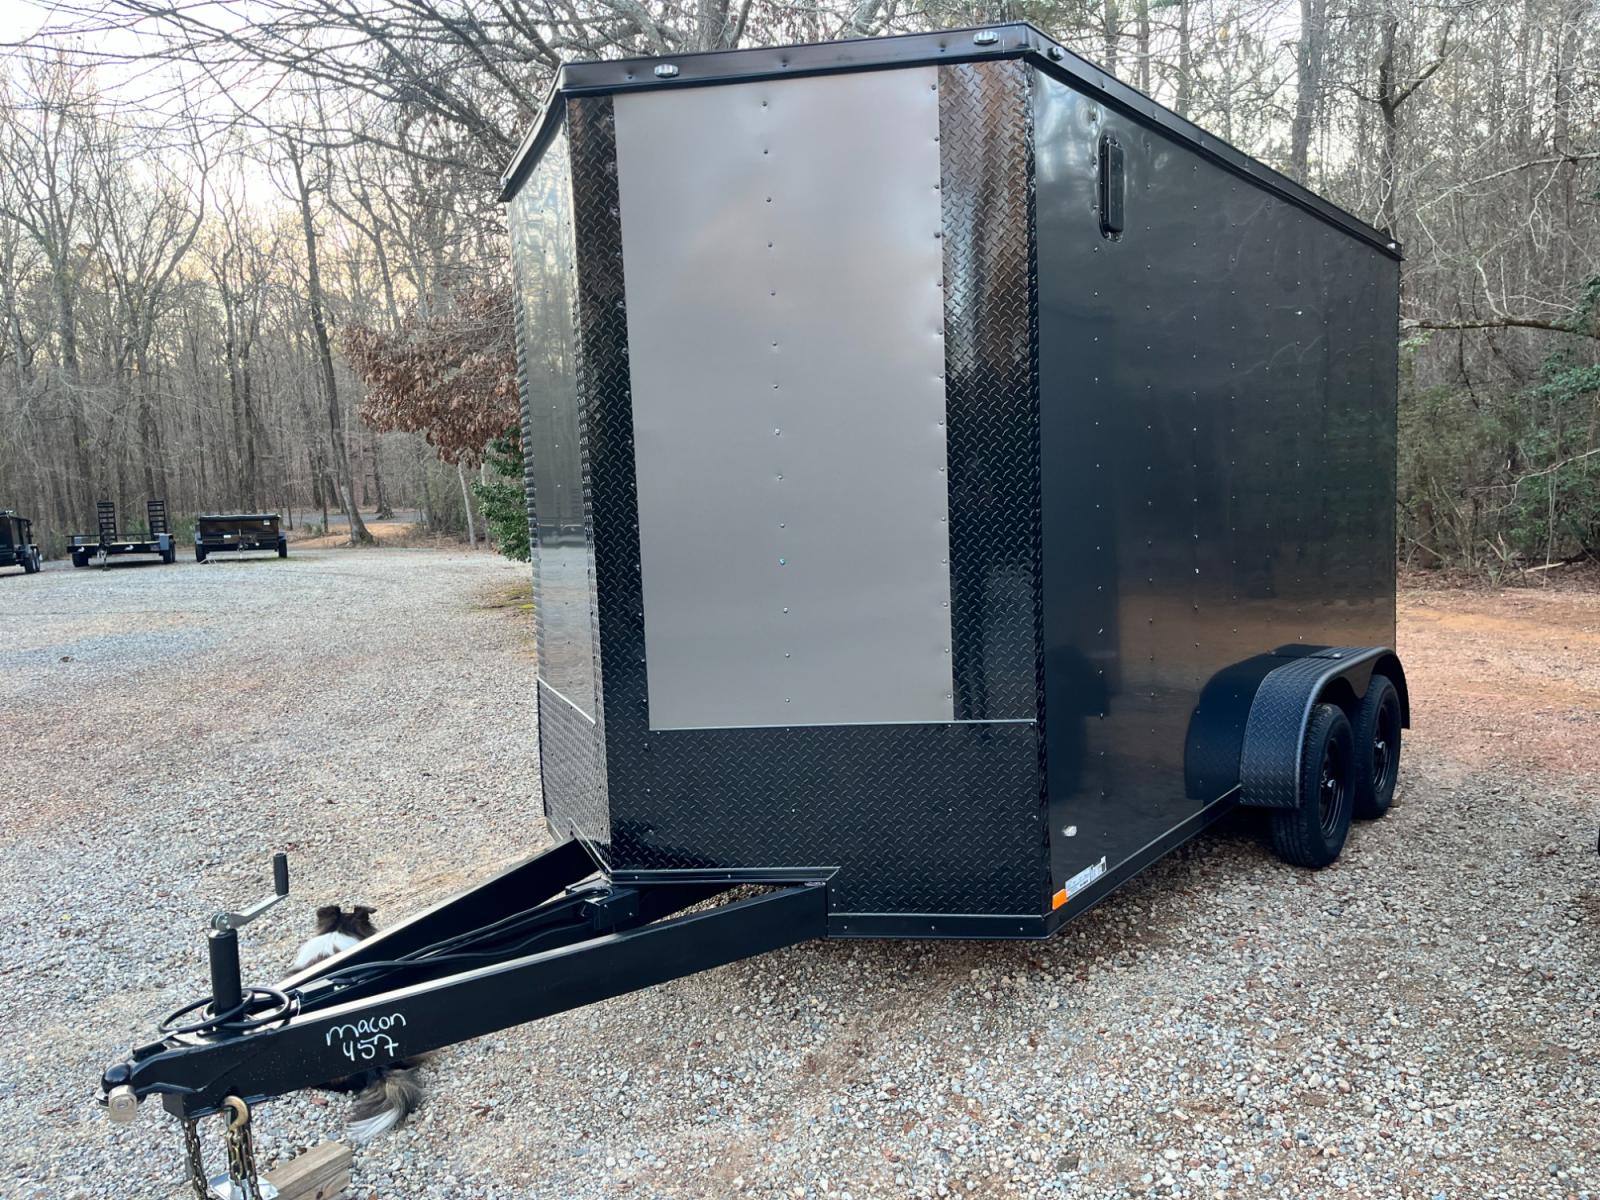 2023 .080 Charcoal Metallic w/Black Out Pkg. Elite Cargo 7ft X 14ft Tandem , located at 1330 Rainey Rd., Macon, 31220, (478) 960-1044, 32.845638, -83.778687 - Brand New 2023 "Top of the Line" Elite Cargo Brand Trailer Made in South Ga. Awesome 7ft X 14ft Tandem Enclosed Cycle Hauler & Cargo Trailer! Taller Inside Height is 7ft 6" Tall Inside & Ramp Door Clearance is 7ft! .080 Thick Metallic Charcoal Aluminum Skin is Awesome! Black Out Pkg Trim, Wider - Photo #8